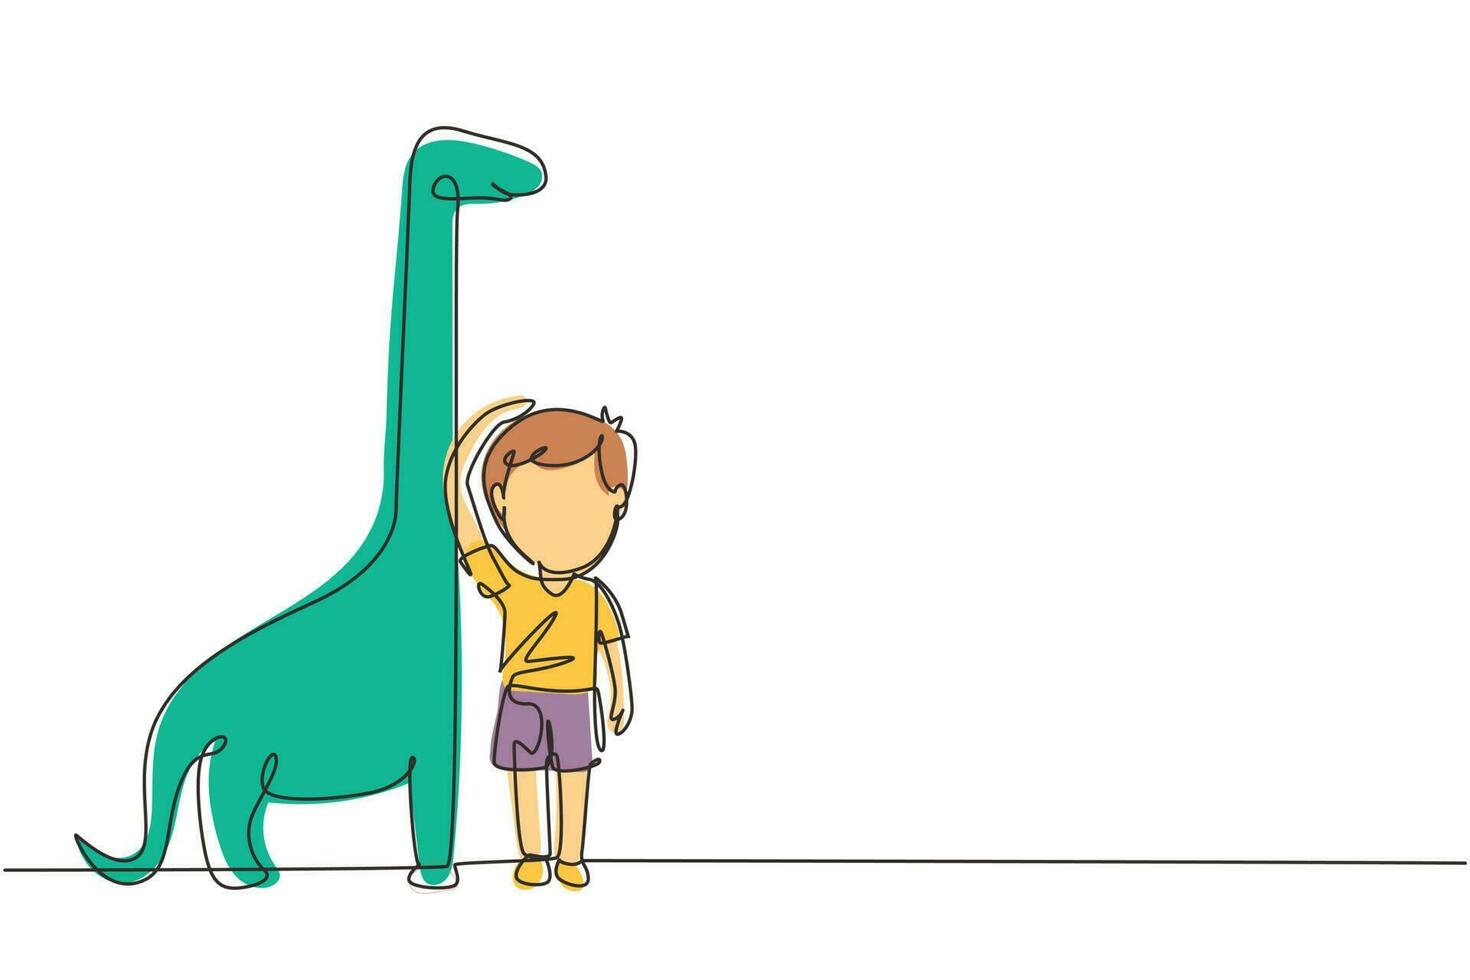 Single continuous line drawing little boy measuring his height with brontosaurus height chart on wall. Kid measures growth. Child measuring height. One line draw graphic design vector illustration